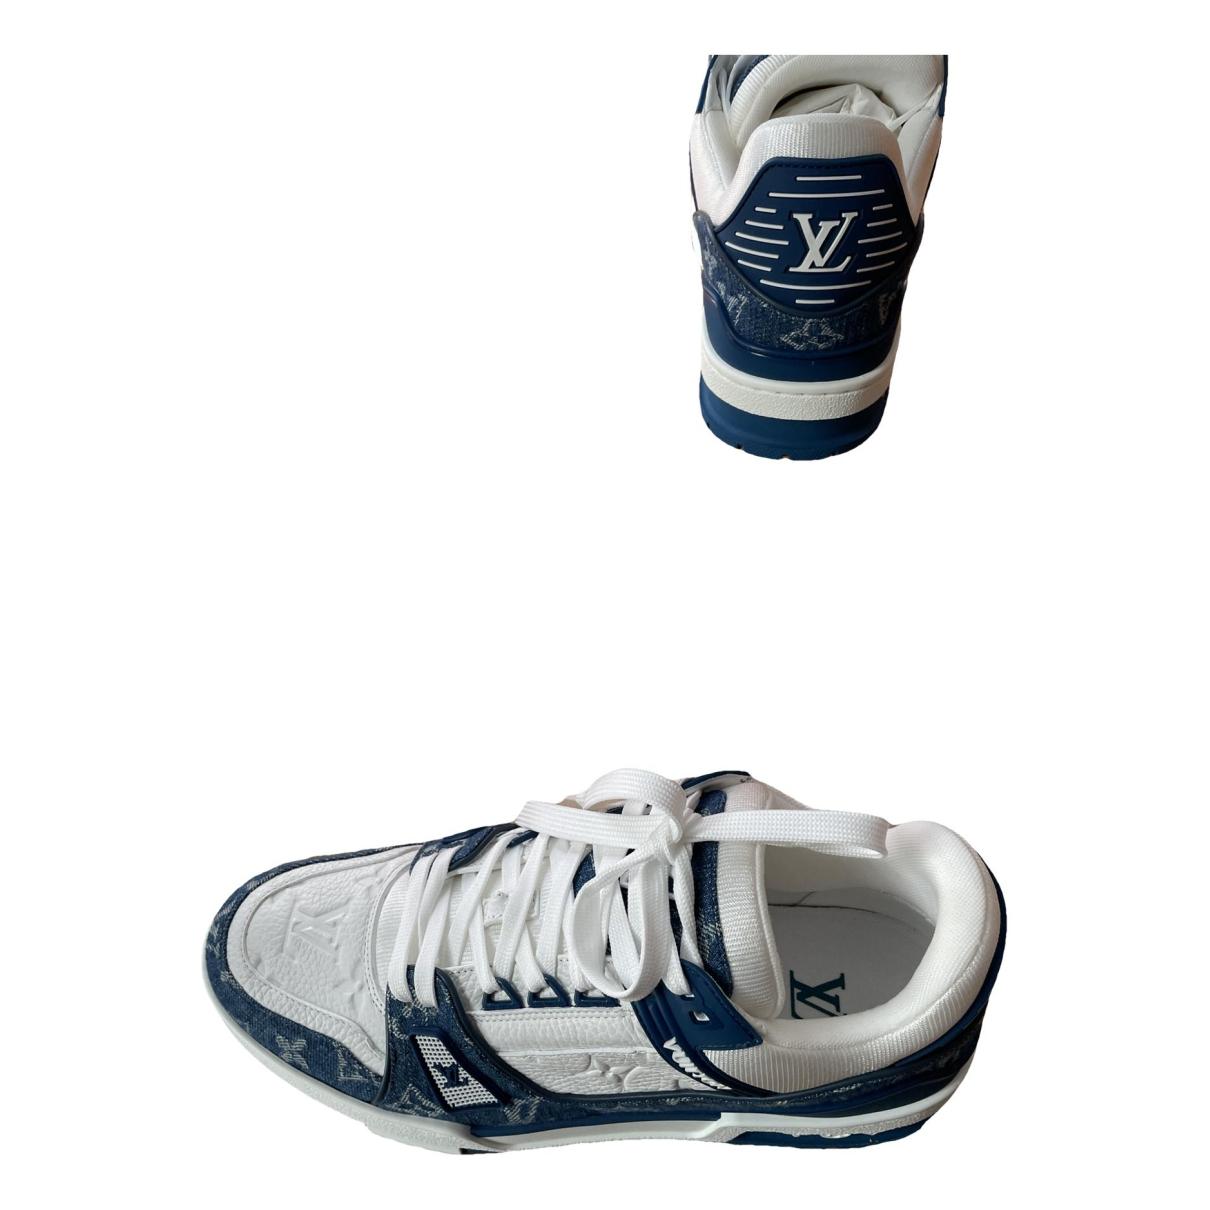 Lv trainer cloth trainers Louis Vuitton Blue size 8.5 UK in Cloth - 28780550